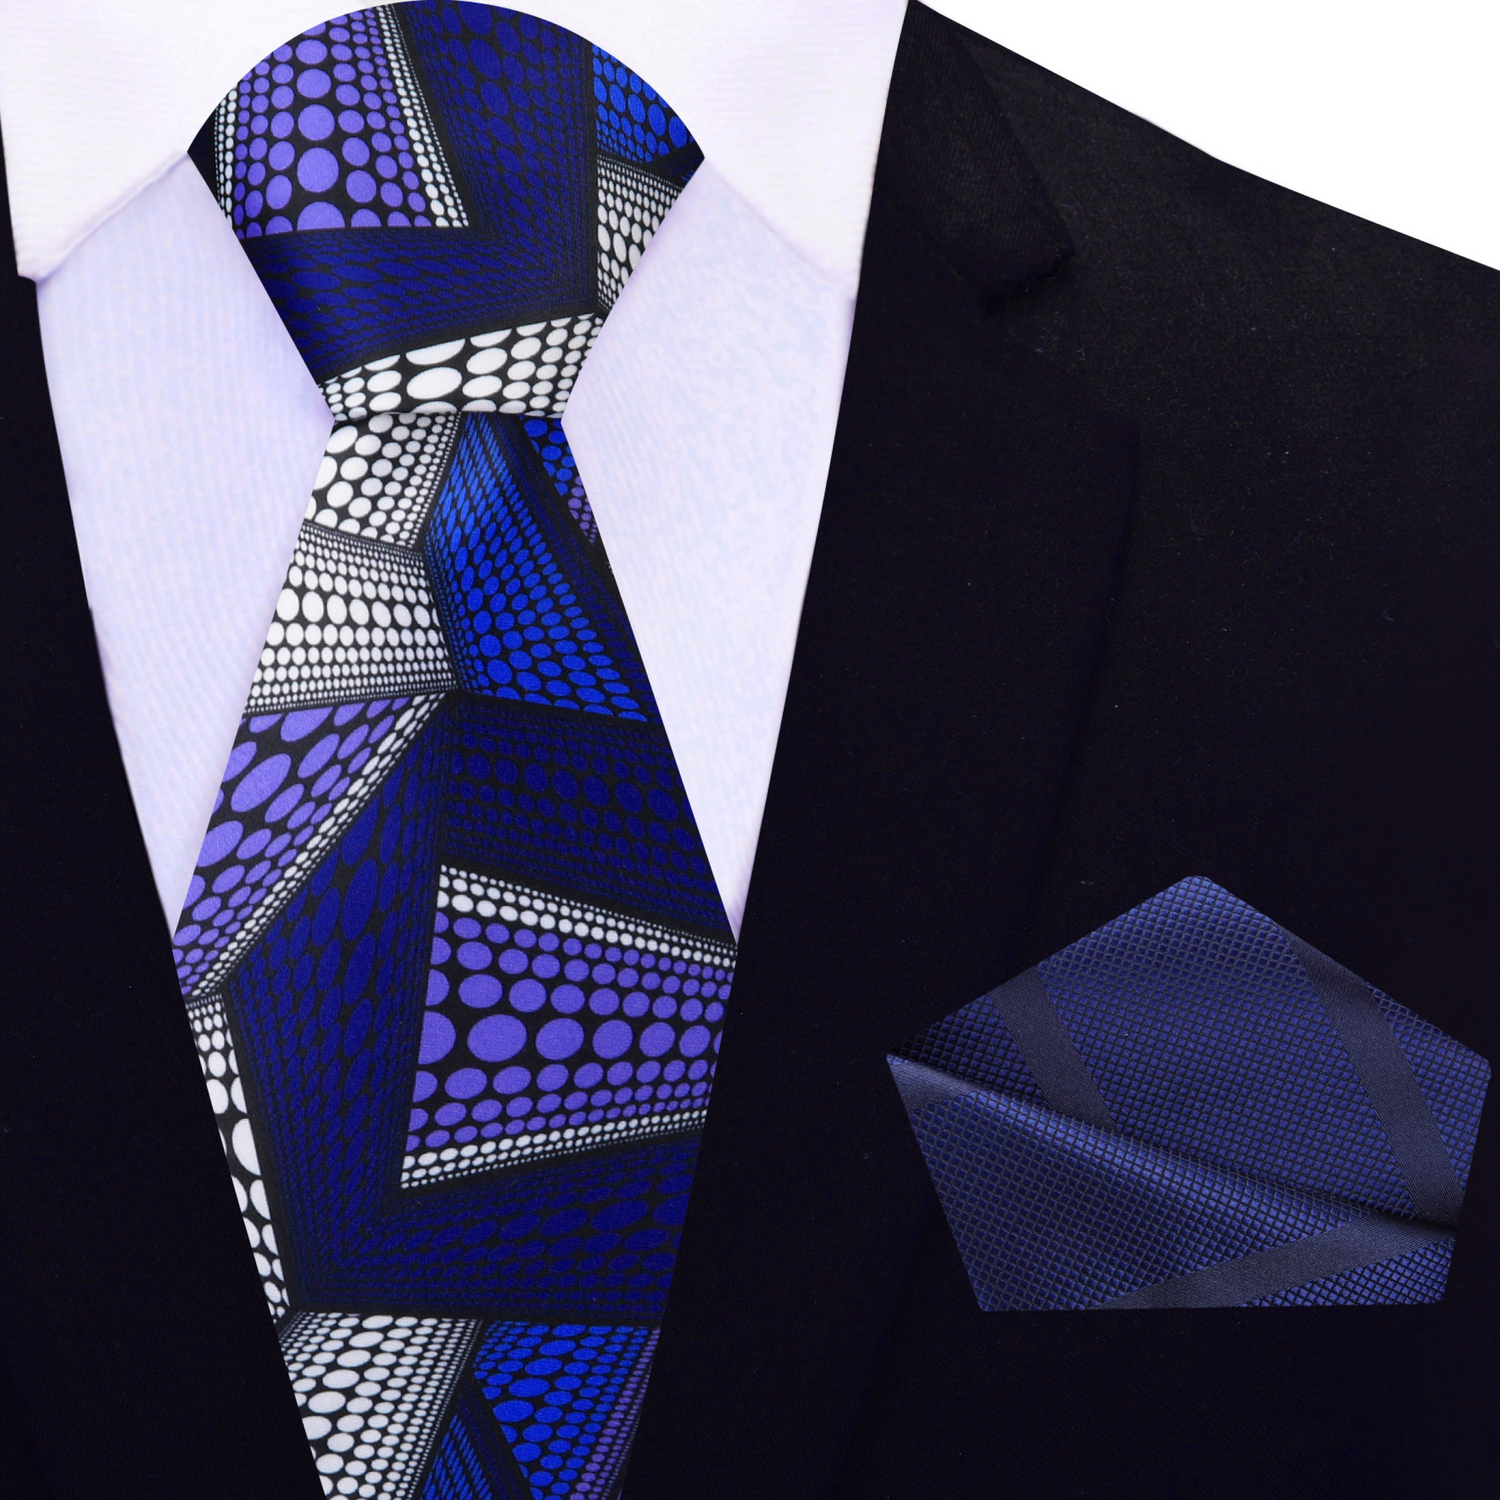 View 2: Blue, Purple, White Abstract Polka Pattern Necktie with a Blue Stripe Texture Square